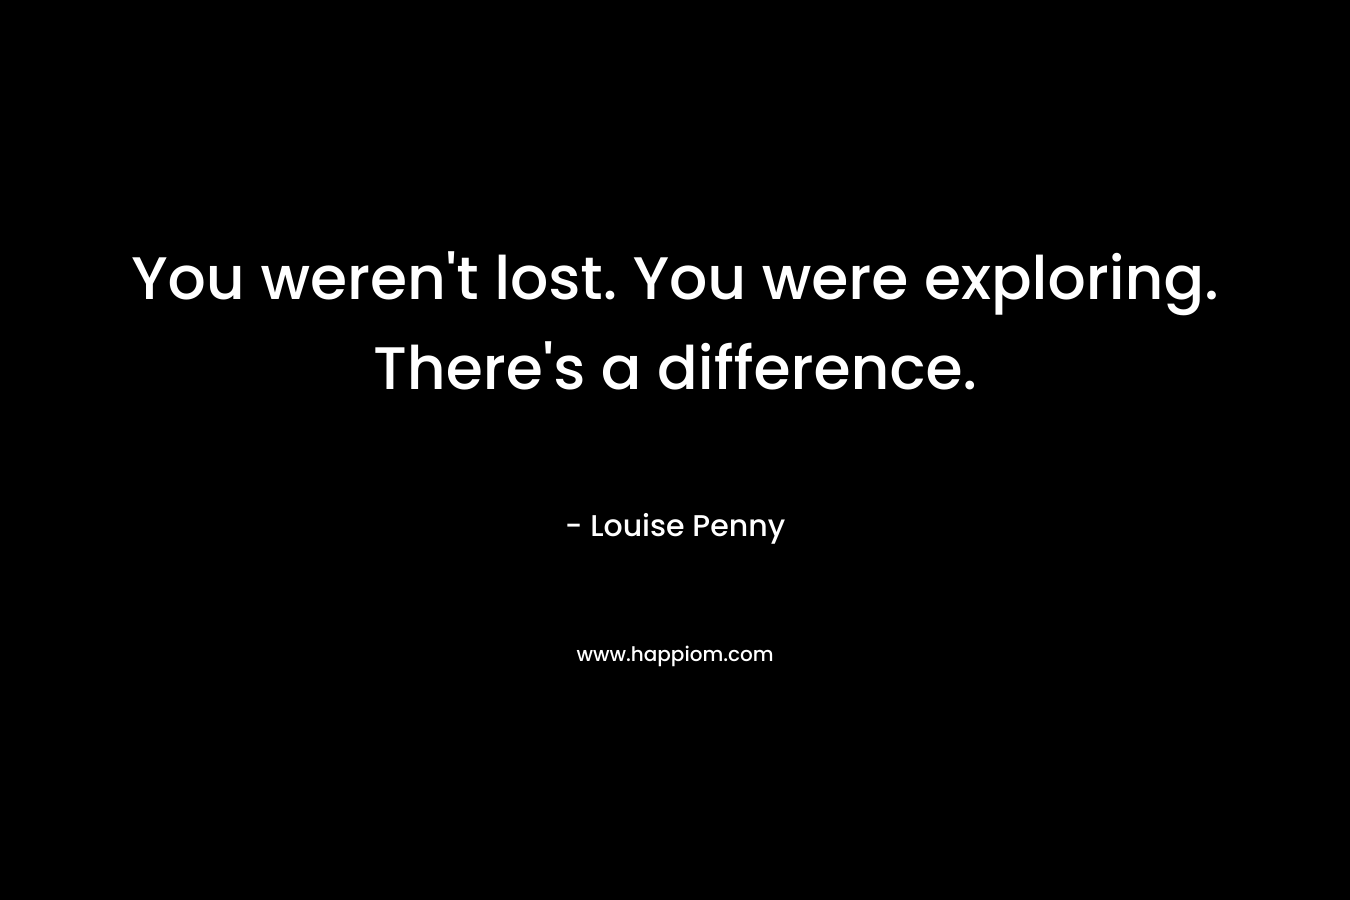 You weren't lost. You were exploring. There's a difference.